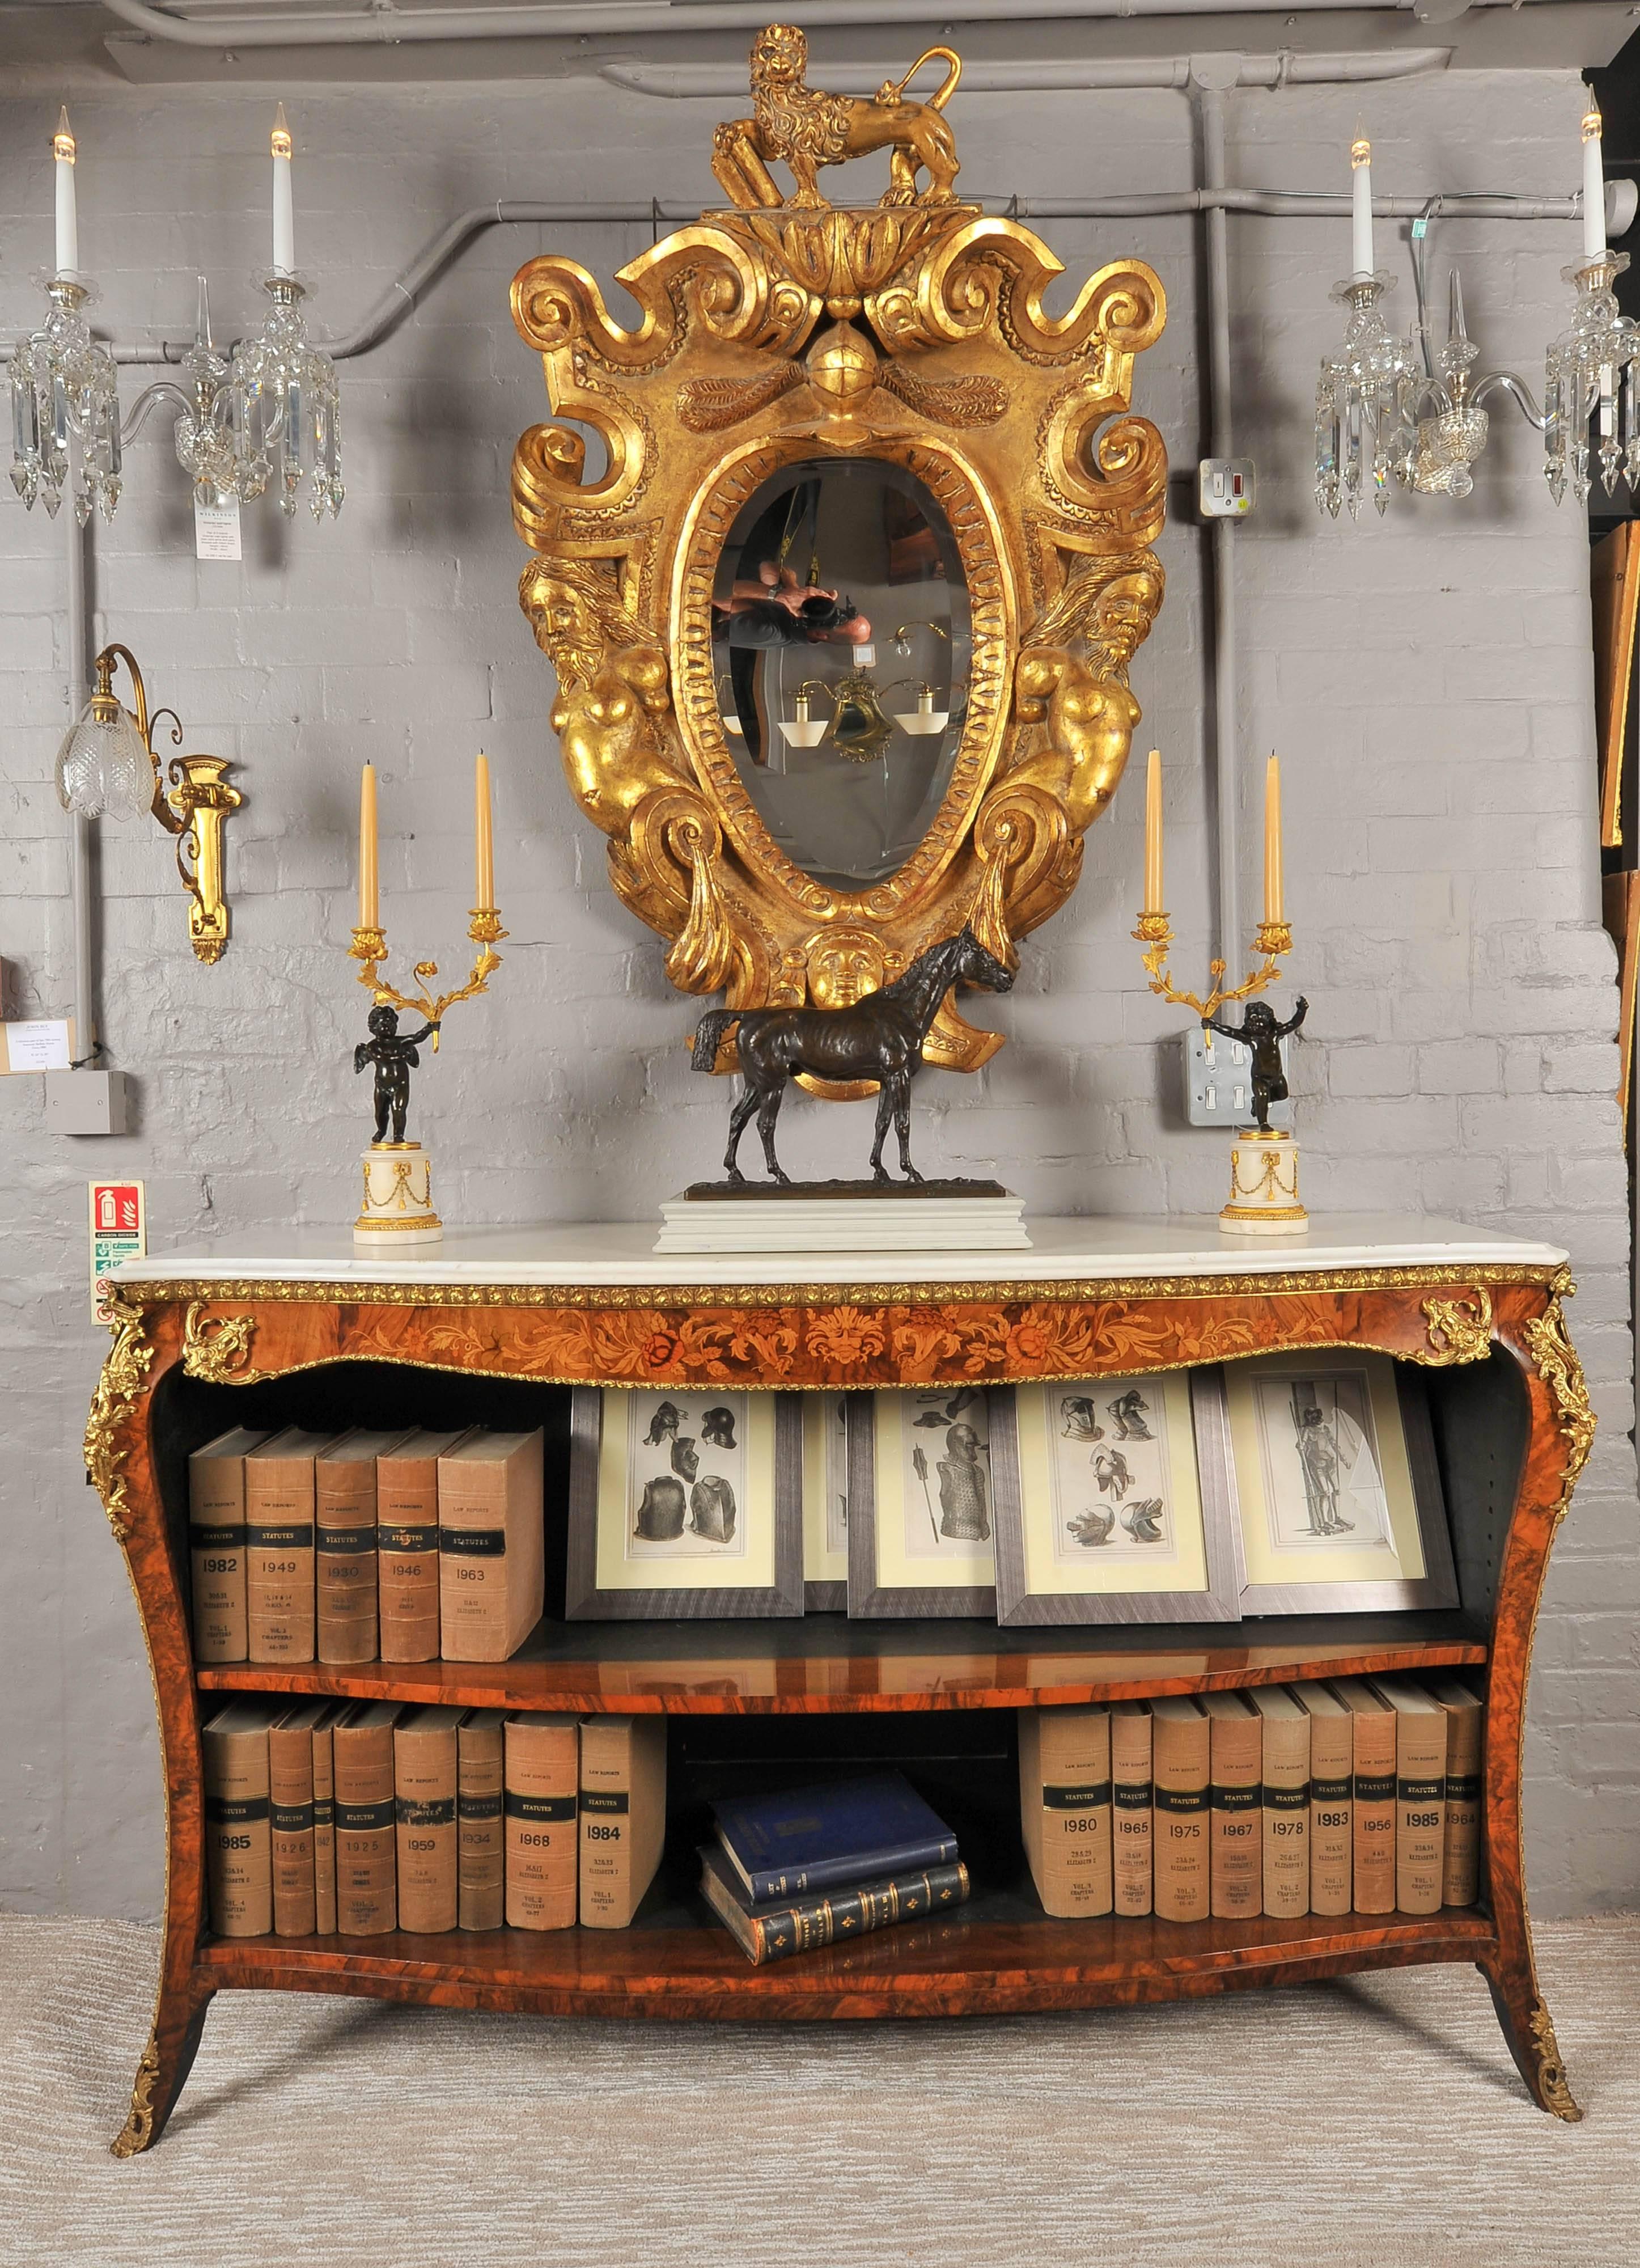 A fine mid-19th century walnut and marquetry serpentine front open bookcase with fabulous ormolu mounts throughout and a white marble top; an adjustable shelf and standing of elegant splay feet.
To the quality and style of Gillows.